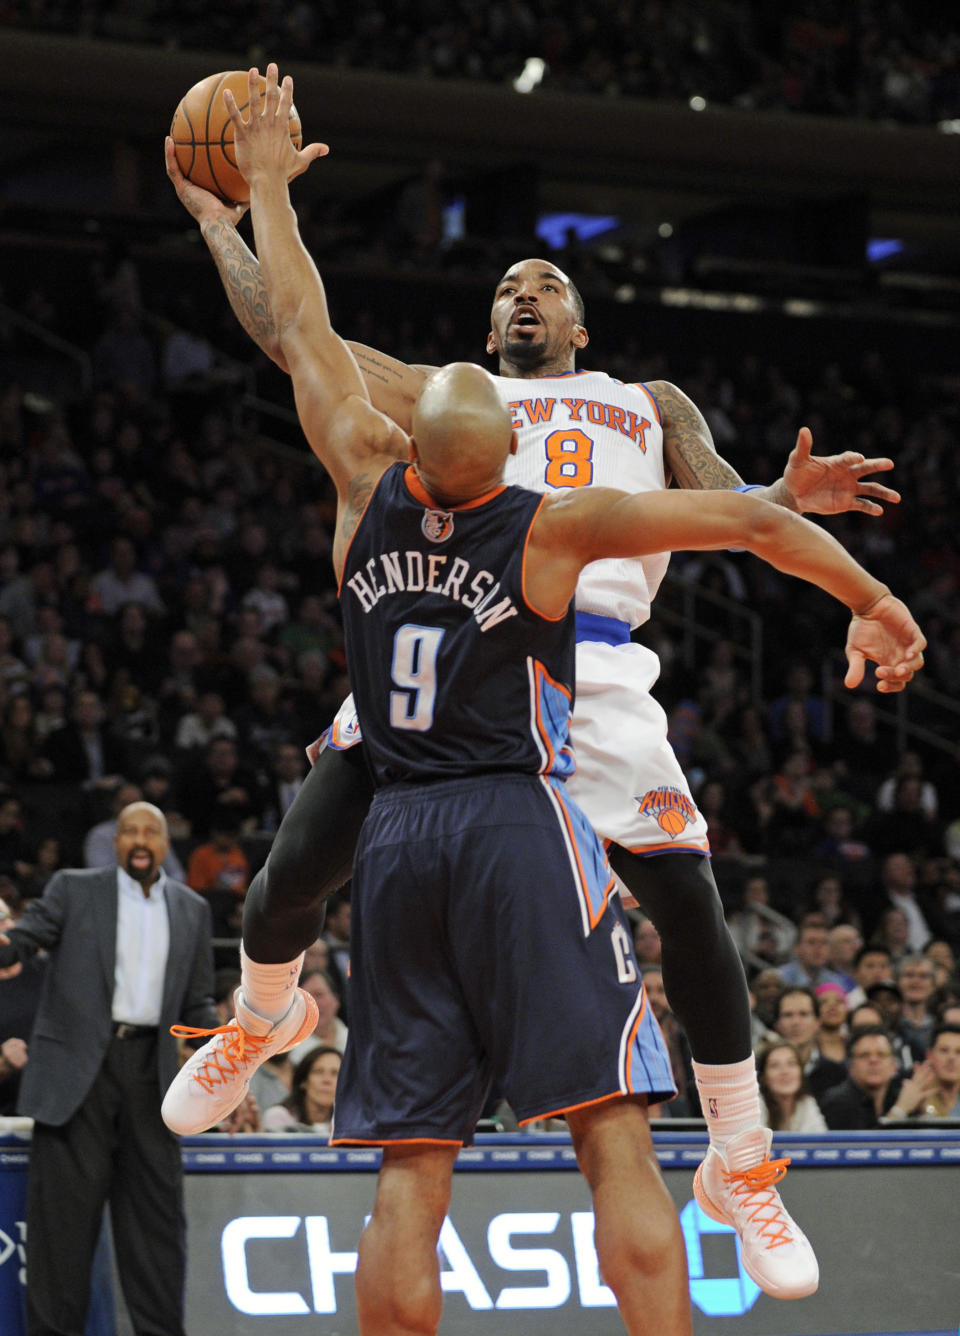 New York Knicks' J.R. Smith, right, puts up a shot over Charlotte Bobcats' Gerald Henderson during the second quarter of an NBA basketball game, Friday, Jan. 24, 2014, at Madison Square Garden in New York. The Knicks won 125-96. (AP Photo/Bill Kostroun)